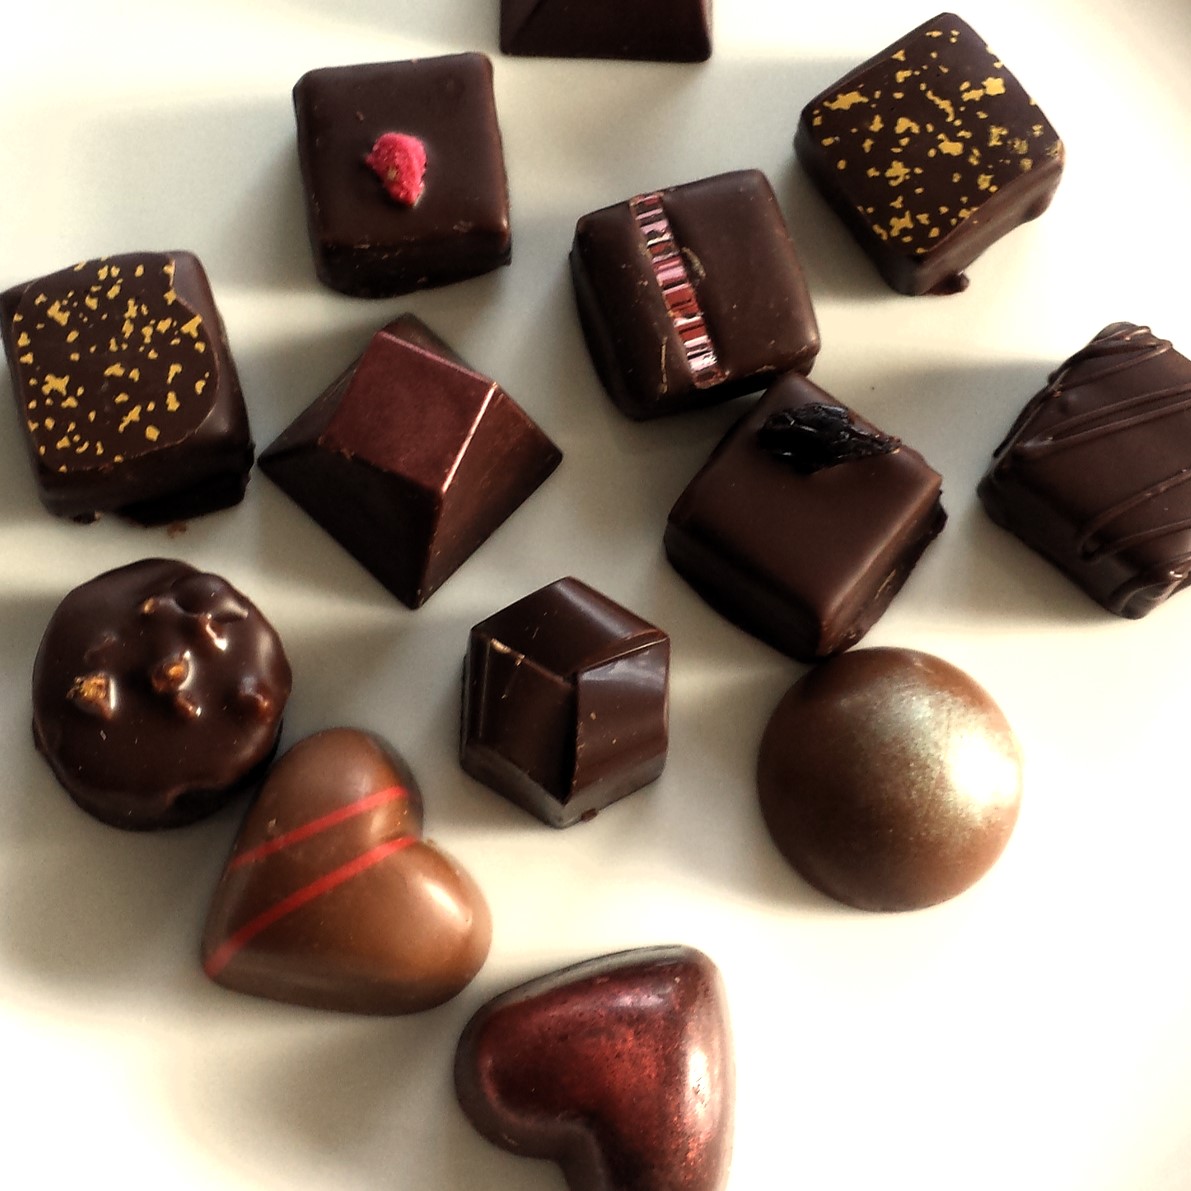 Essential Guidelines for Matching Wine and Chocolate